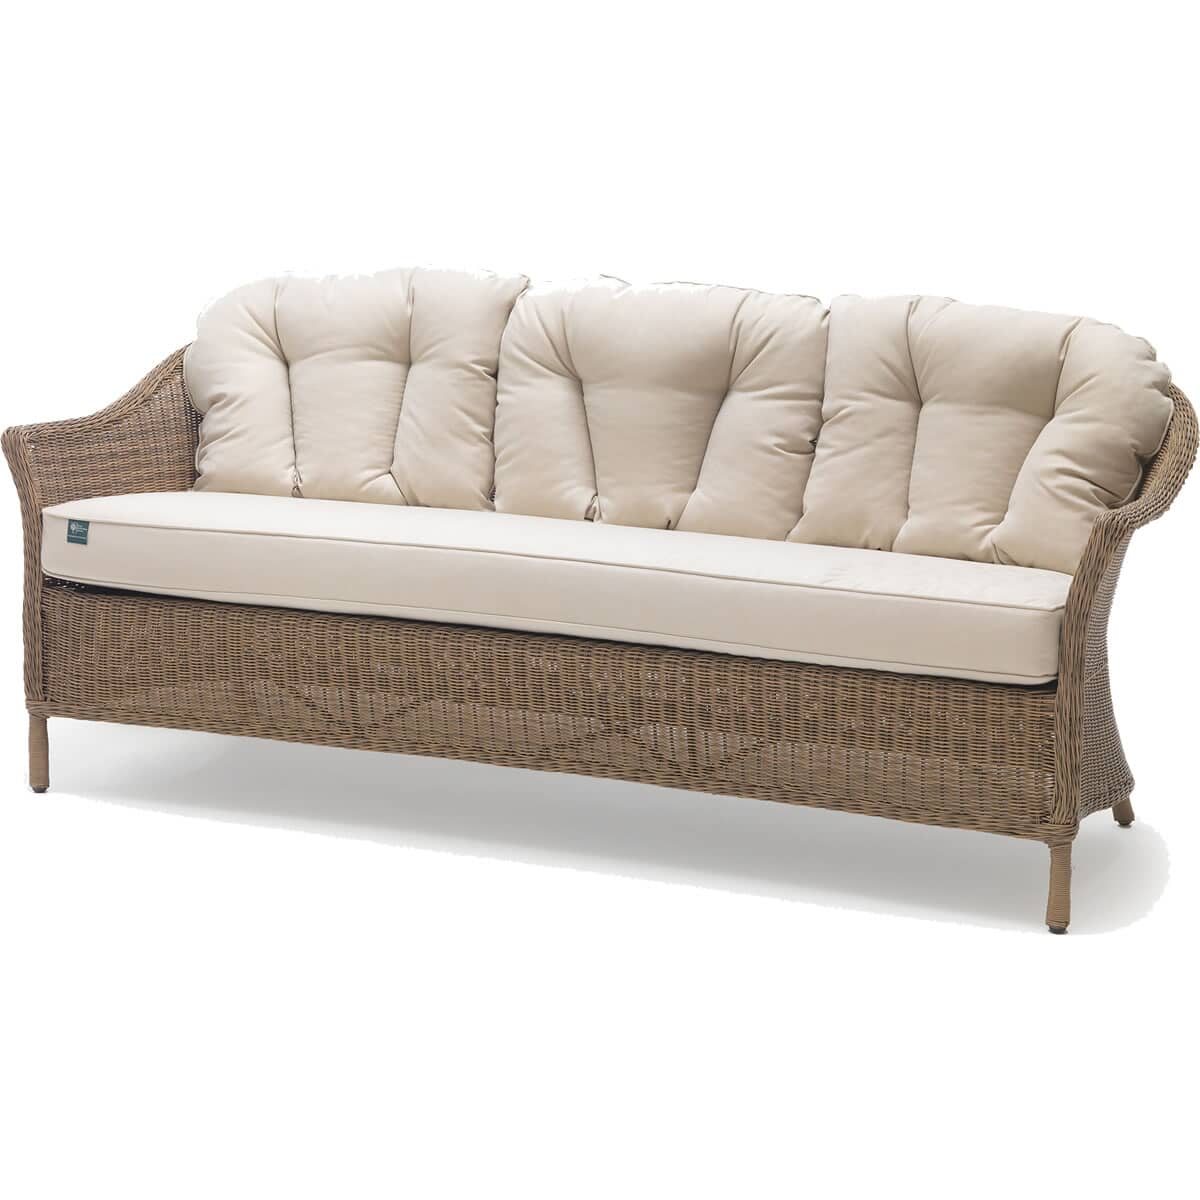 Kettler RHS Harlow Carr - 3 Seat Sofa With Cushions